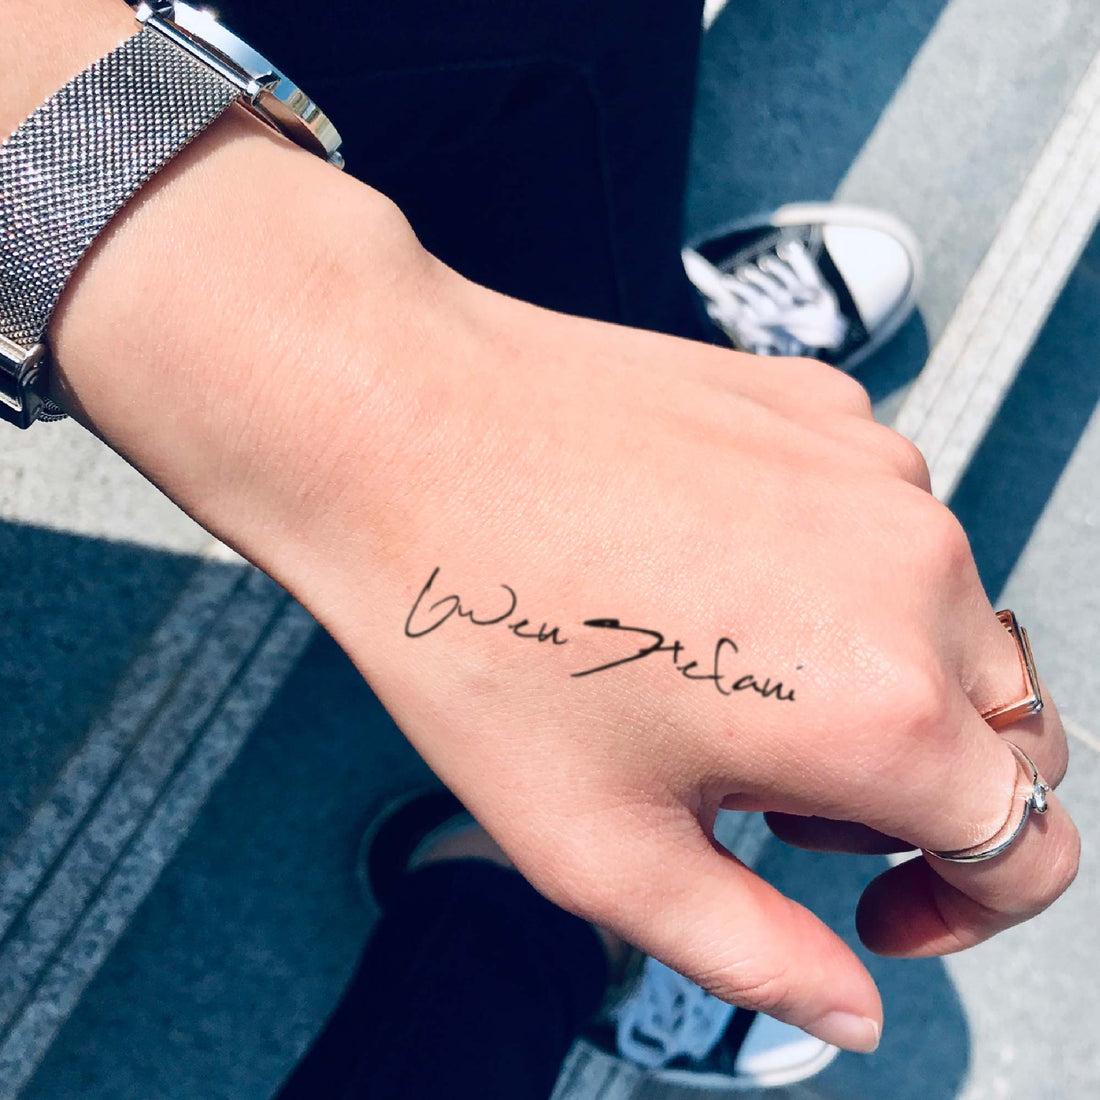 Gwen Stefani custom temporary tattoo sticker design idea inspiration meanings removal arm wrist hand words font name signature calligraphy lyrics tour concert outfits merch accessory gift souvenir costumes wear dress up code